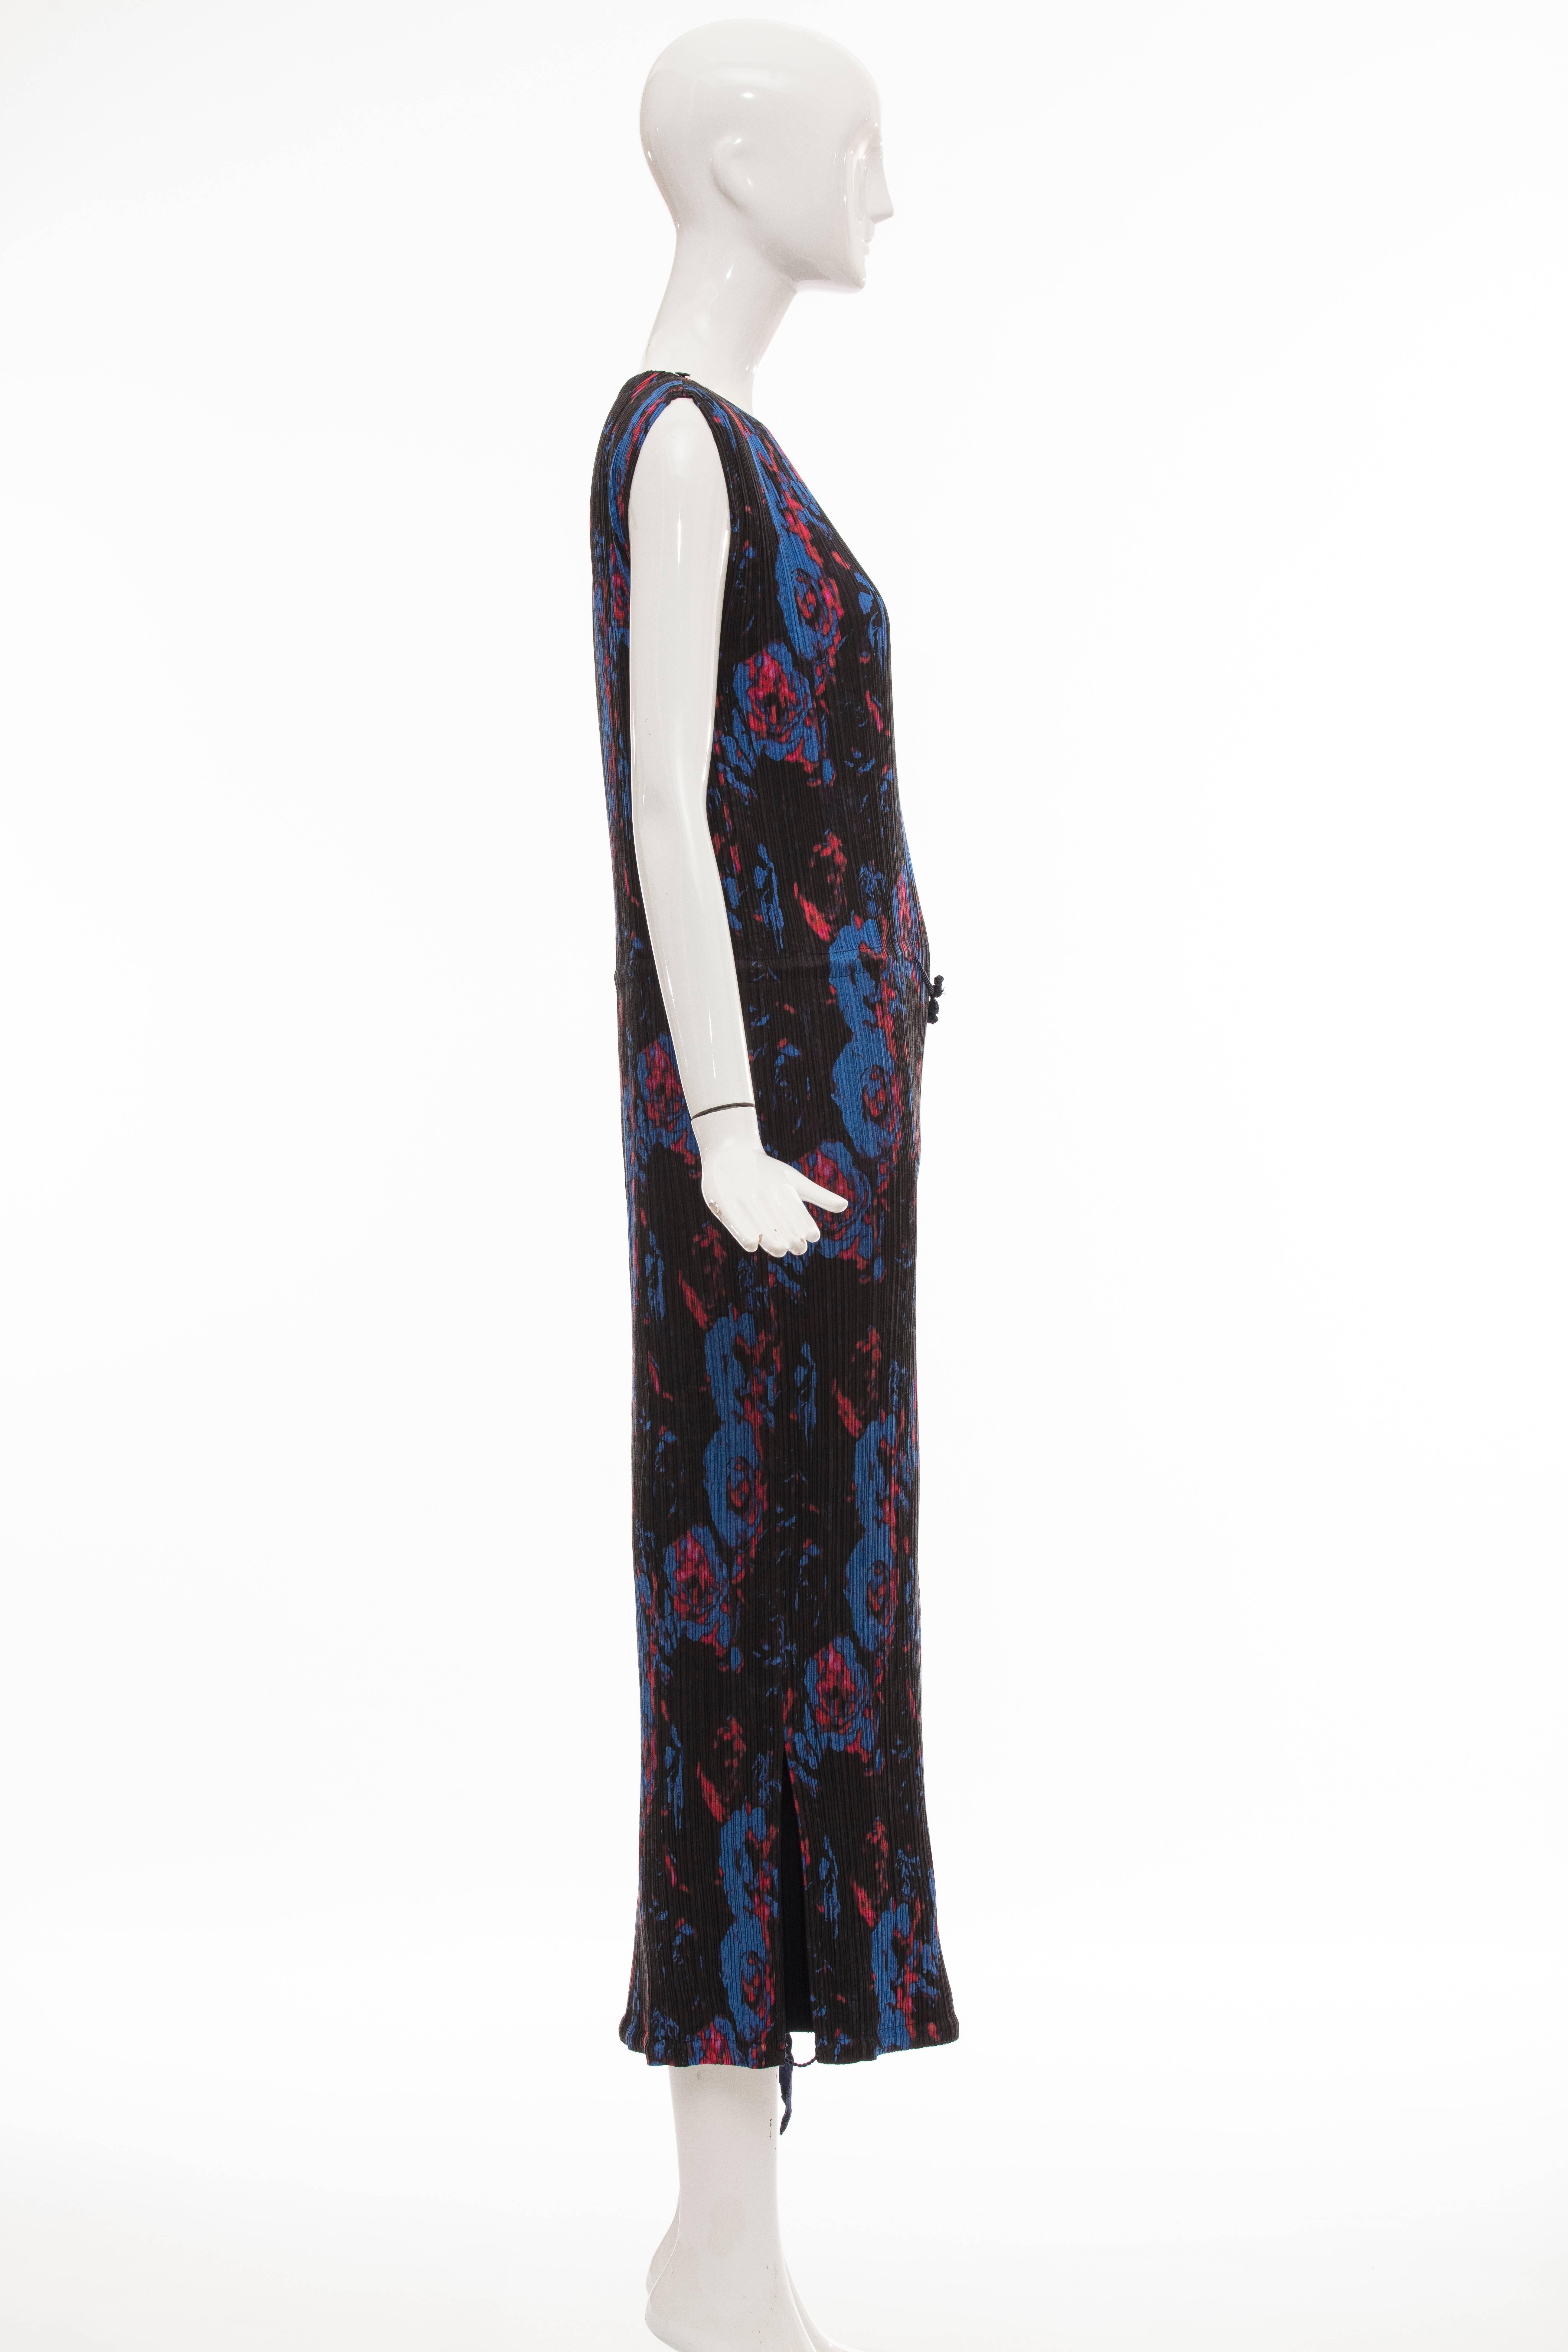 Issey Miyake Sleeveless Navy Blue Printed Silk Pleated Dress, Spring 2007 For Sale 3